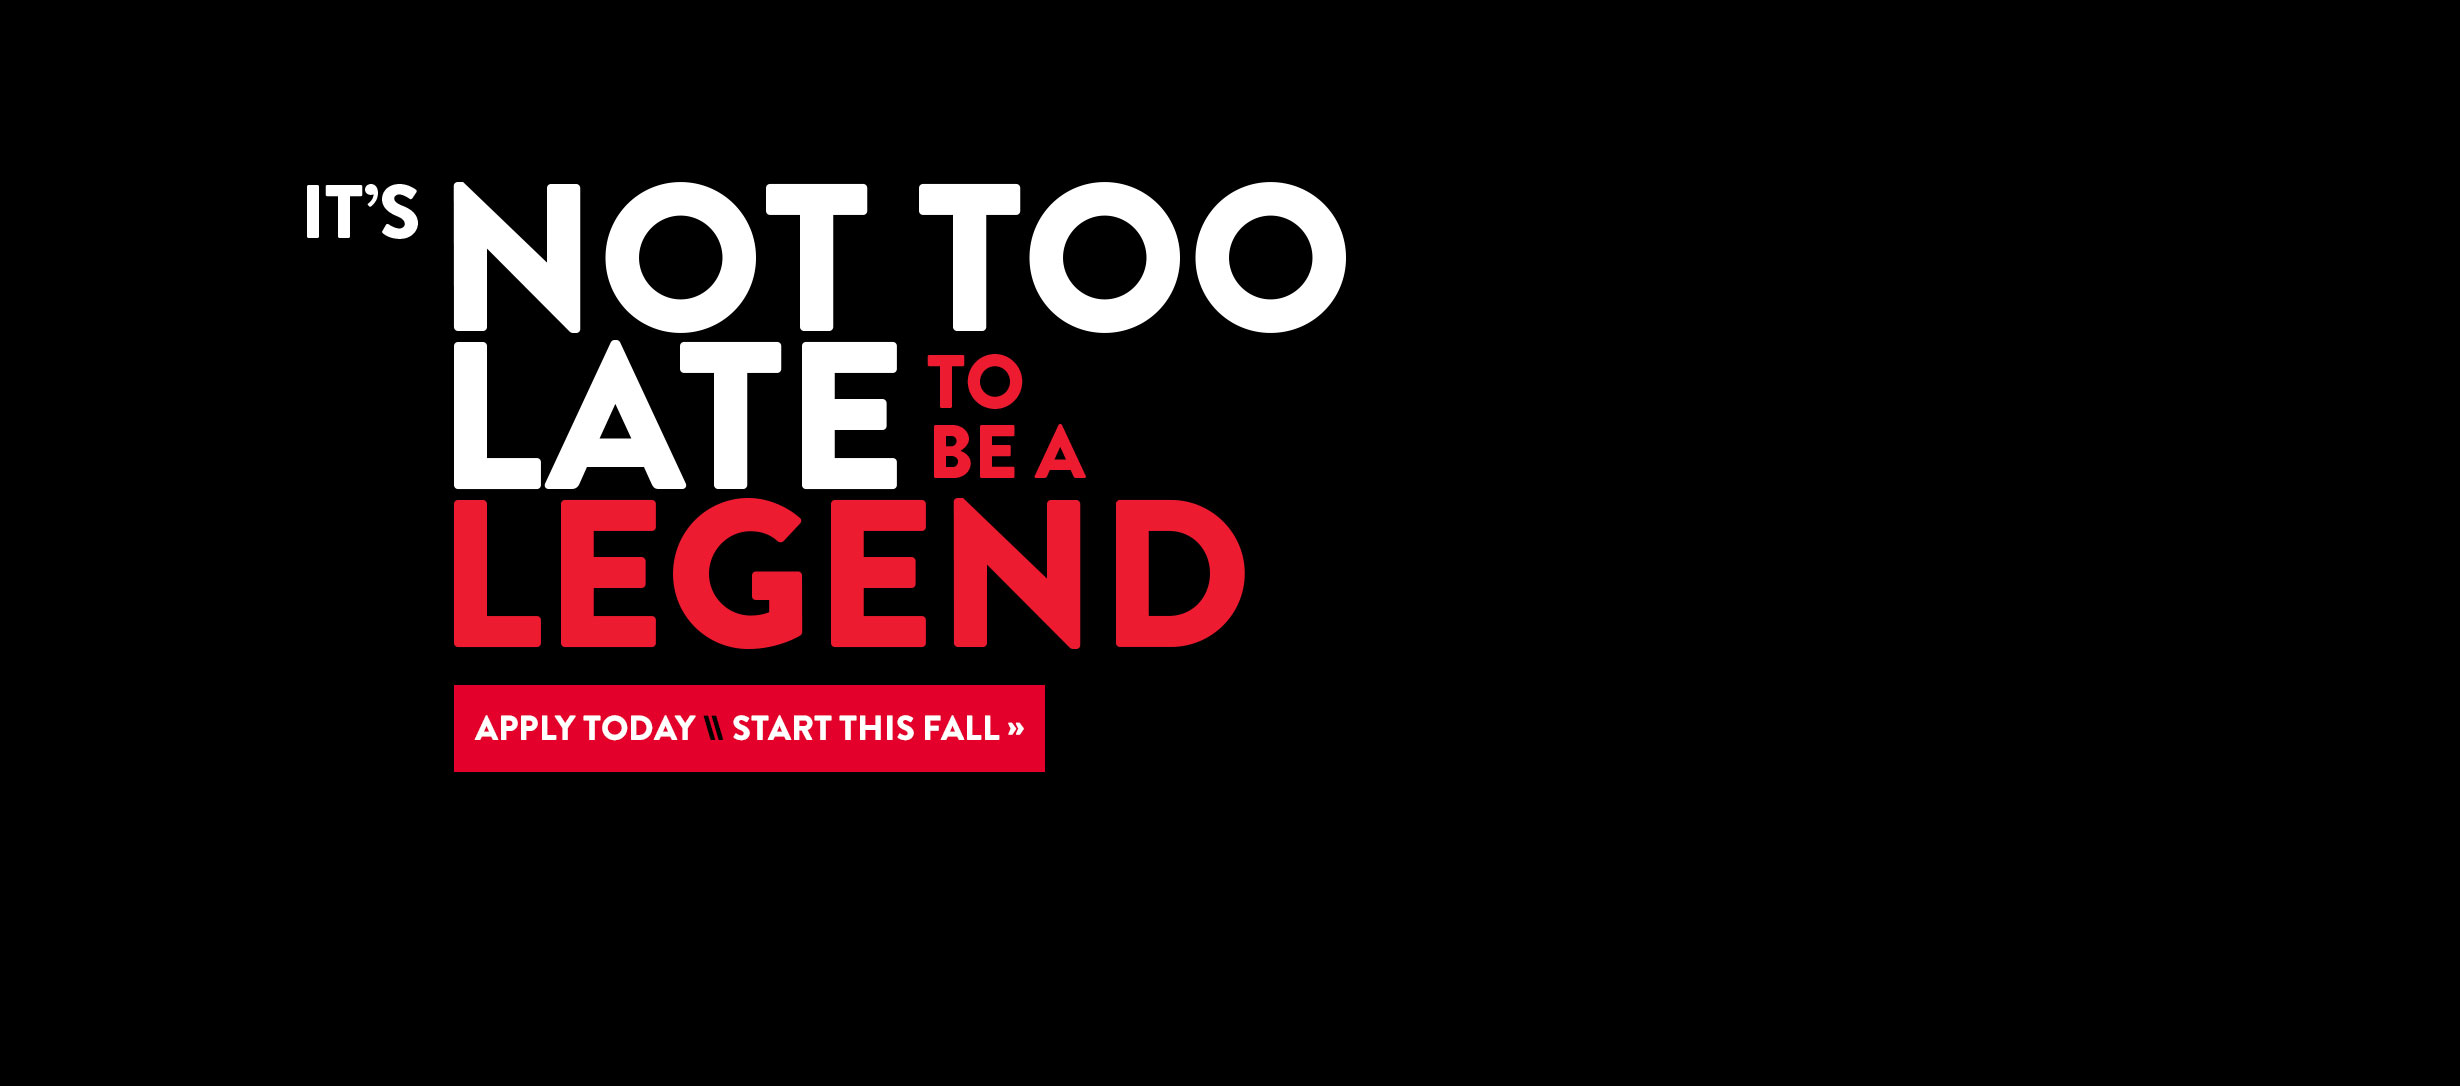 It's not too late to be a legend. Apply today, start this fall.